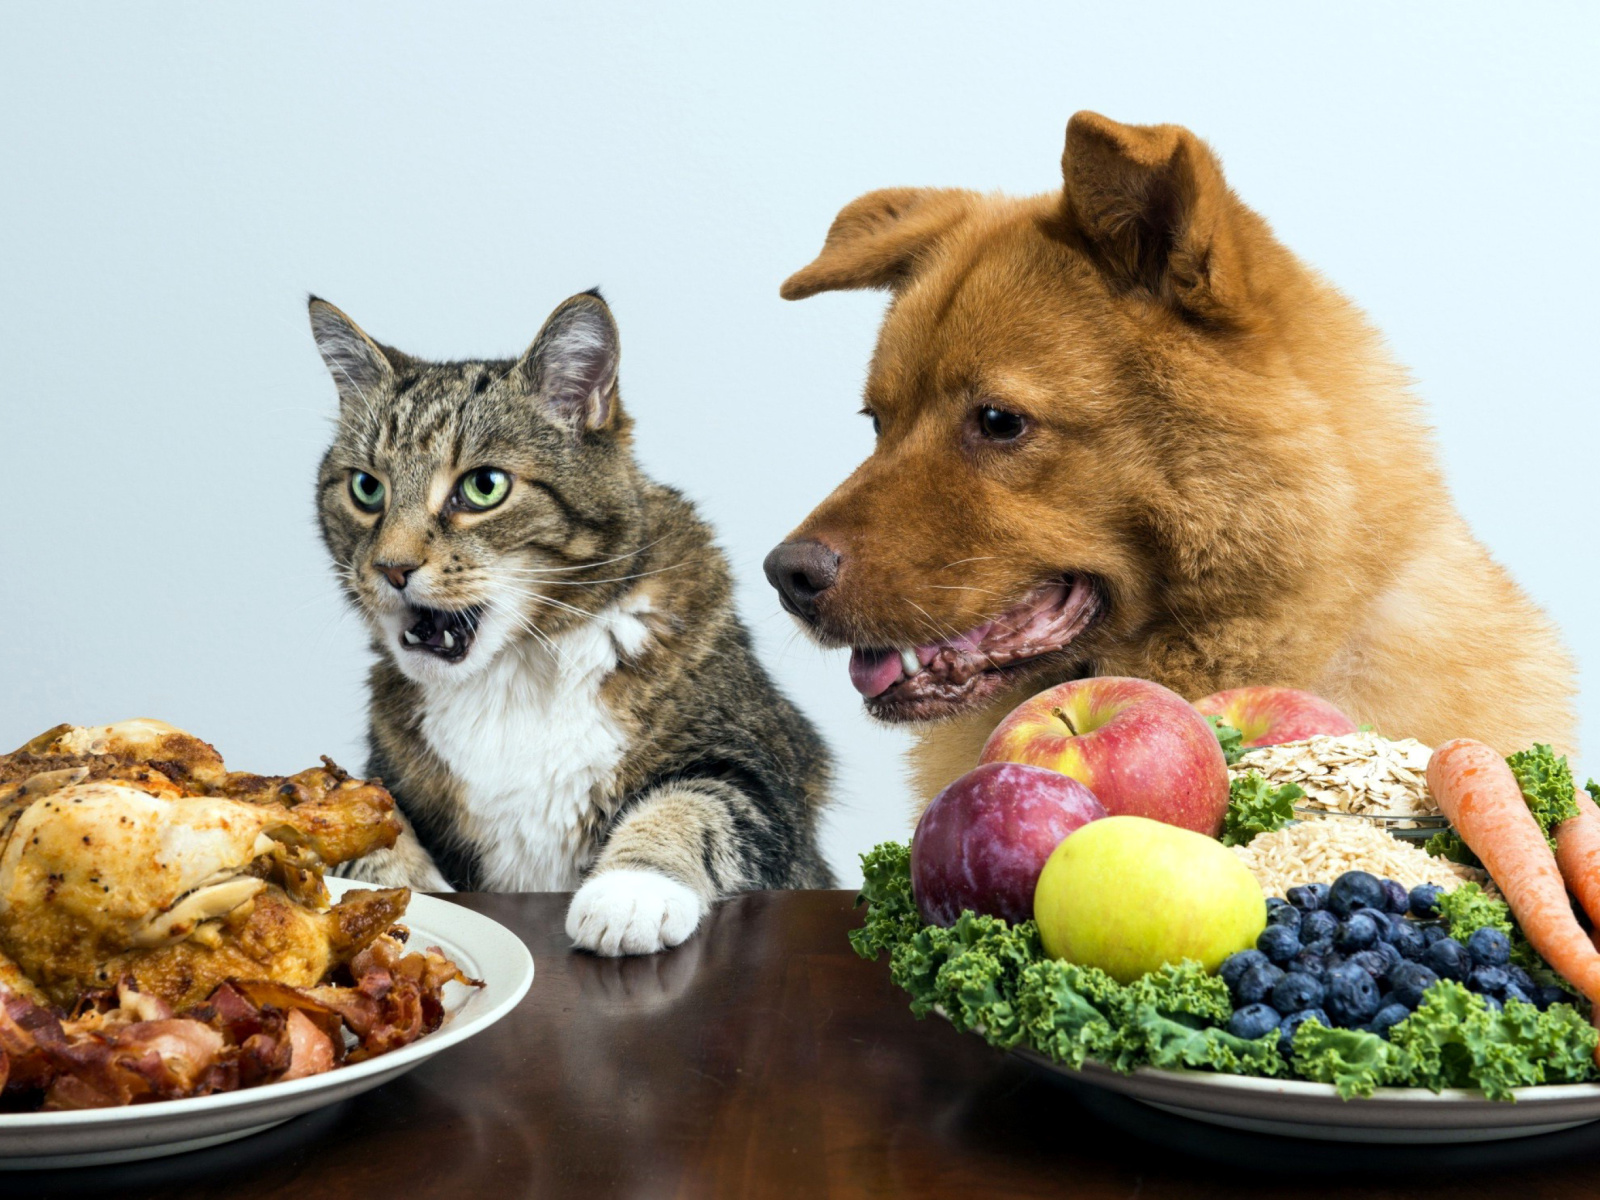 Dog and Cat Dinner wallpaper 1600x1200